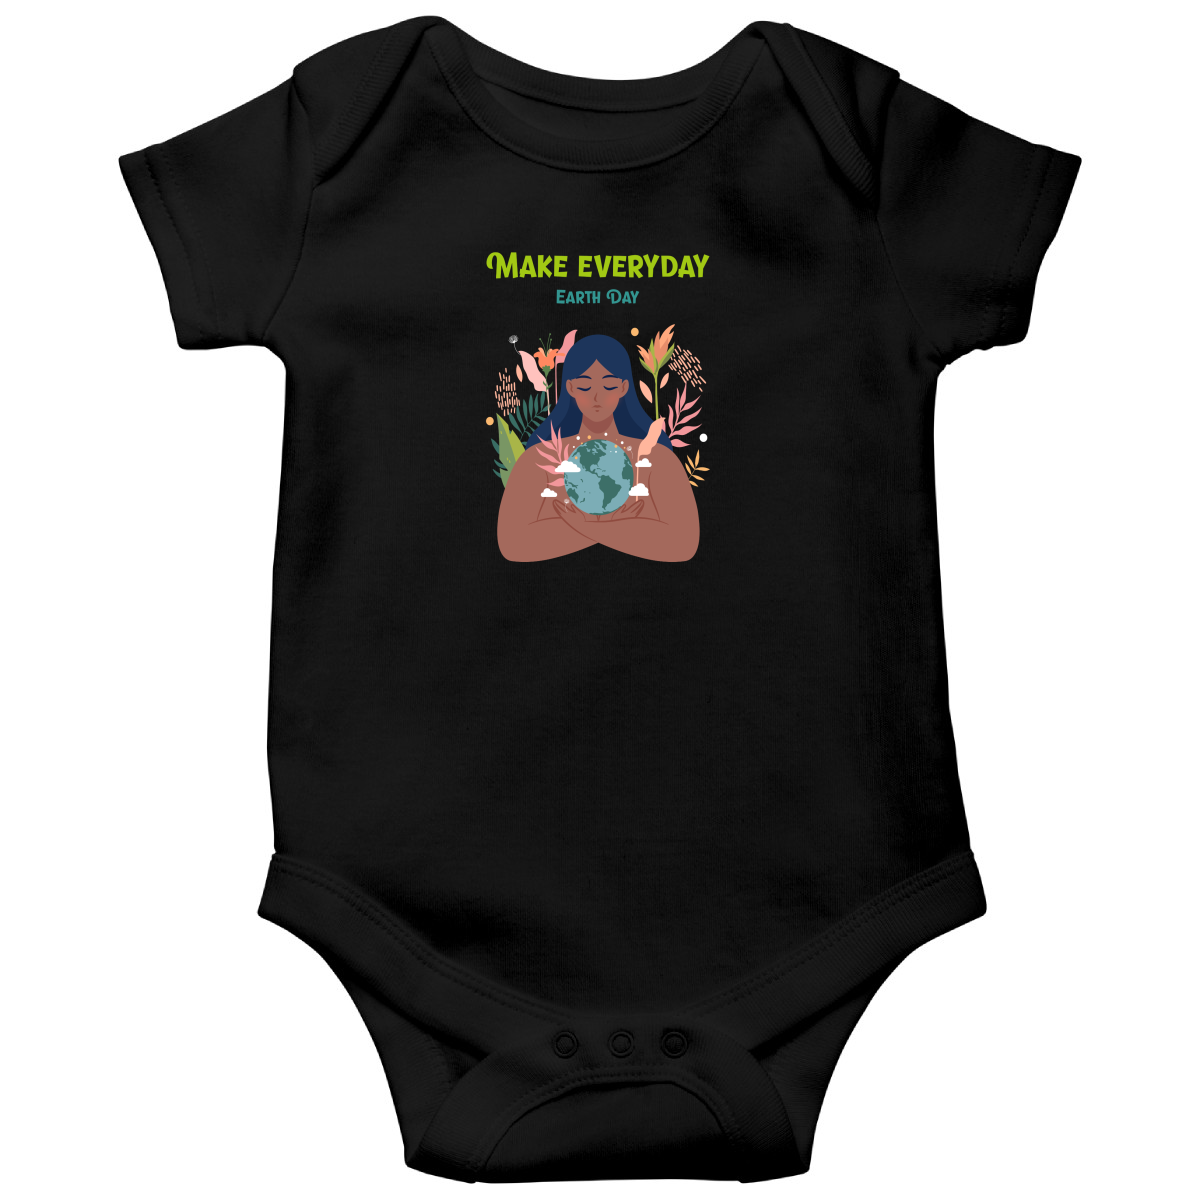 Earth Day Everyday Baby Bodysuits | Black